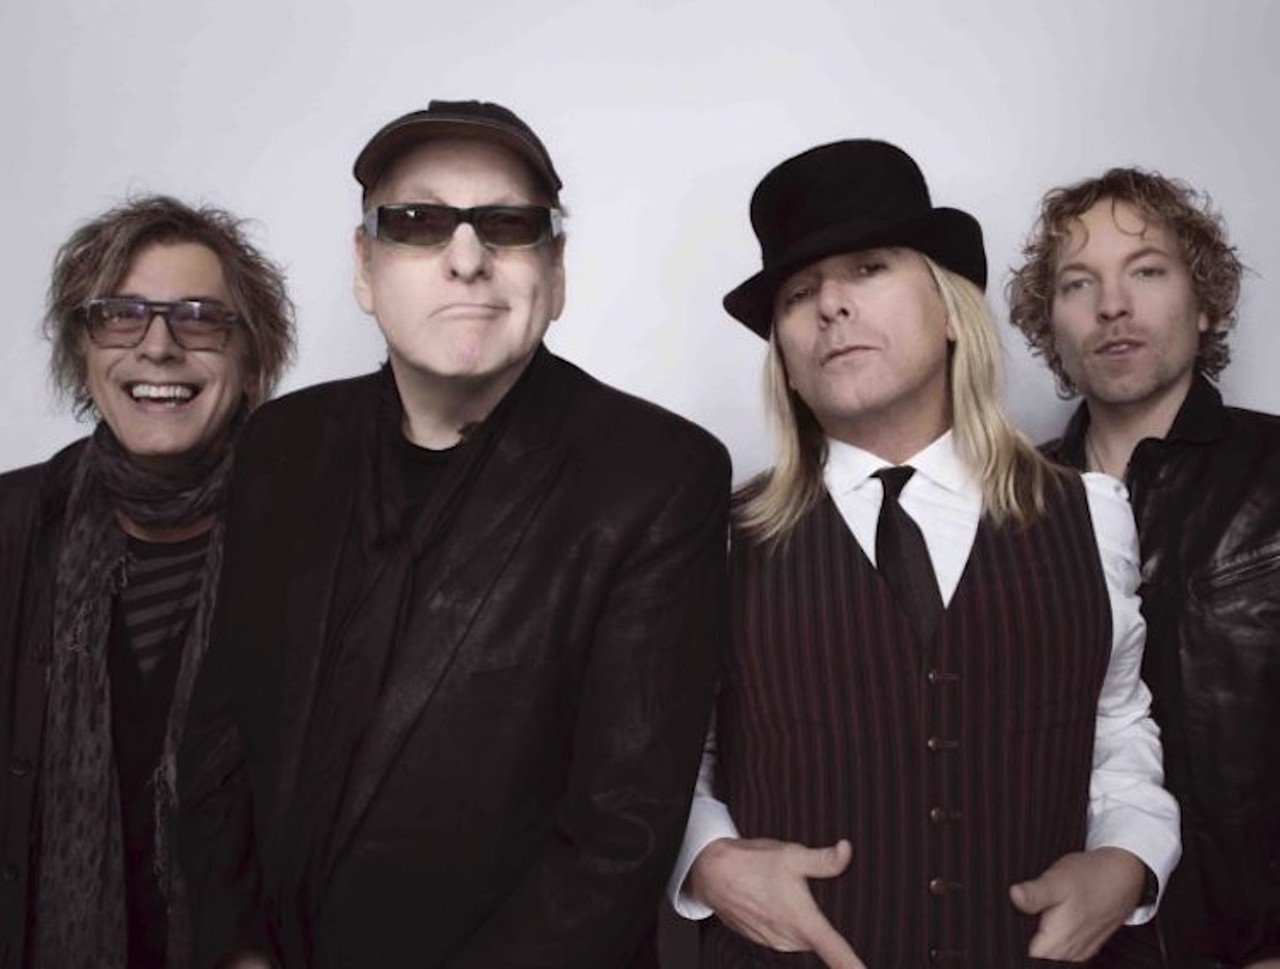 Cheap Trick
Hard Rock Live, March 12
Going strong since the 1970s, Cheap Trick's alchemical combinations of pop, rock and heavy metal have created an instantly recognizable collection of singles like Surrender, Dream Police and I Want You to Want Me. The band was even inducted into the Rock and Roll Hall of Fame in 2016. Don't Be Cruel; head over to Ticketmaster to see the show.
Photo via Cheap Trick/Willful Publicity